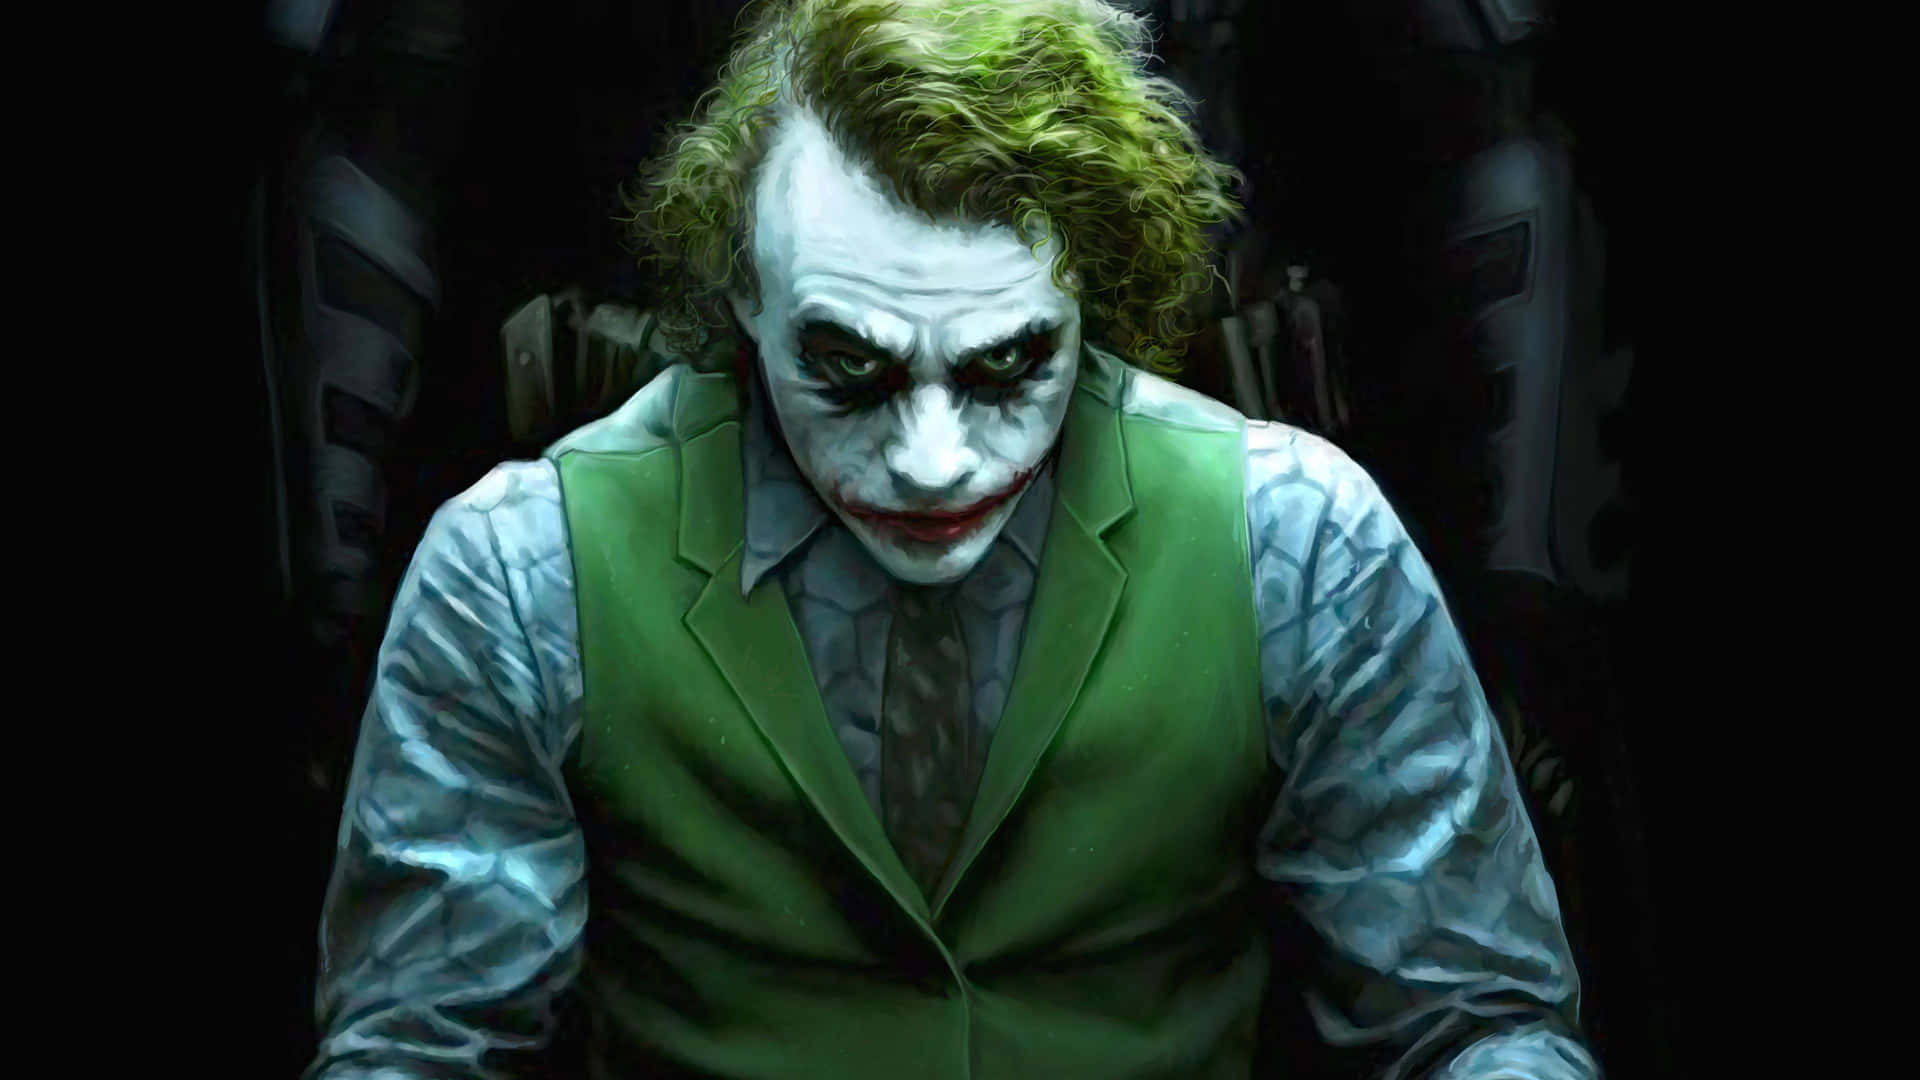 The Joker Is Sitting In Front Of A Dark Background